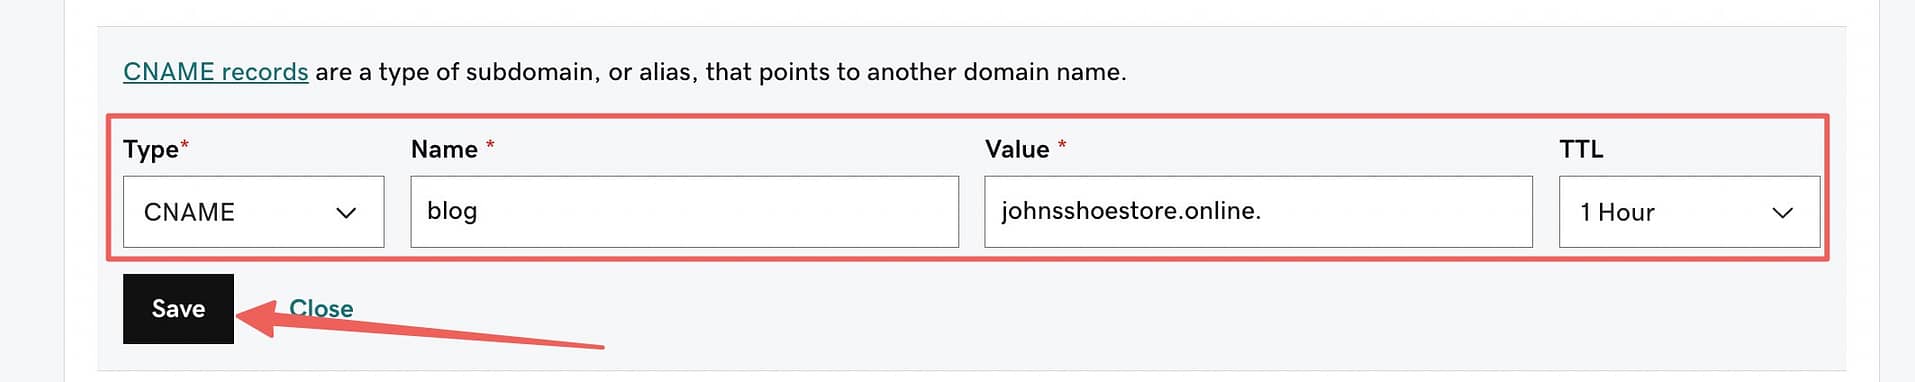 How to create subdomain in GoDaddy: CNAME records information with a red arrow pointing at the "Save" button.